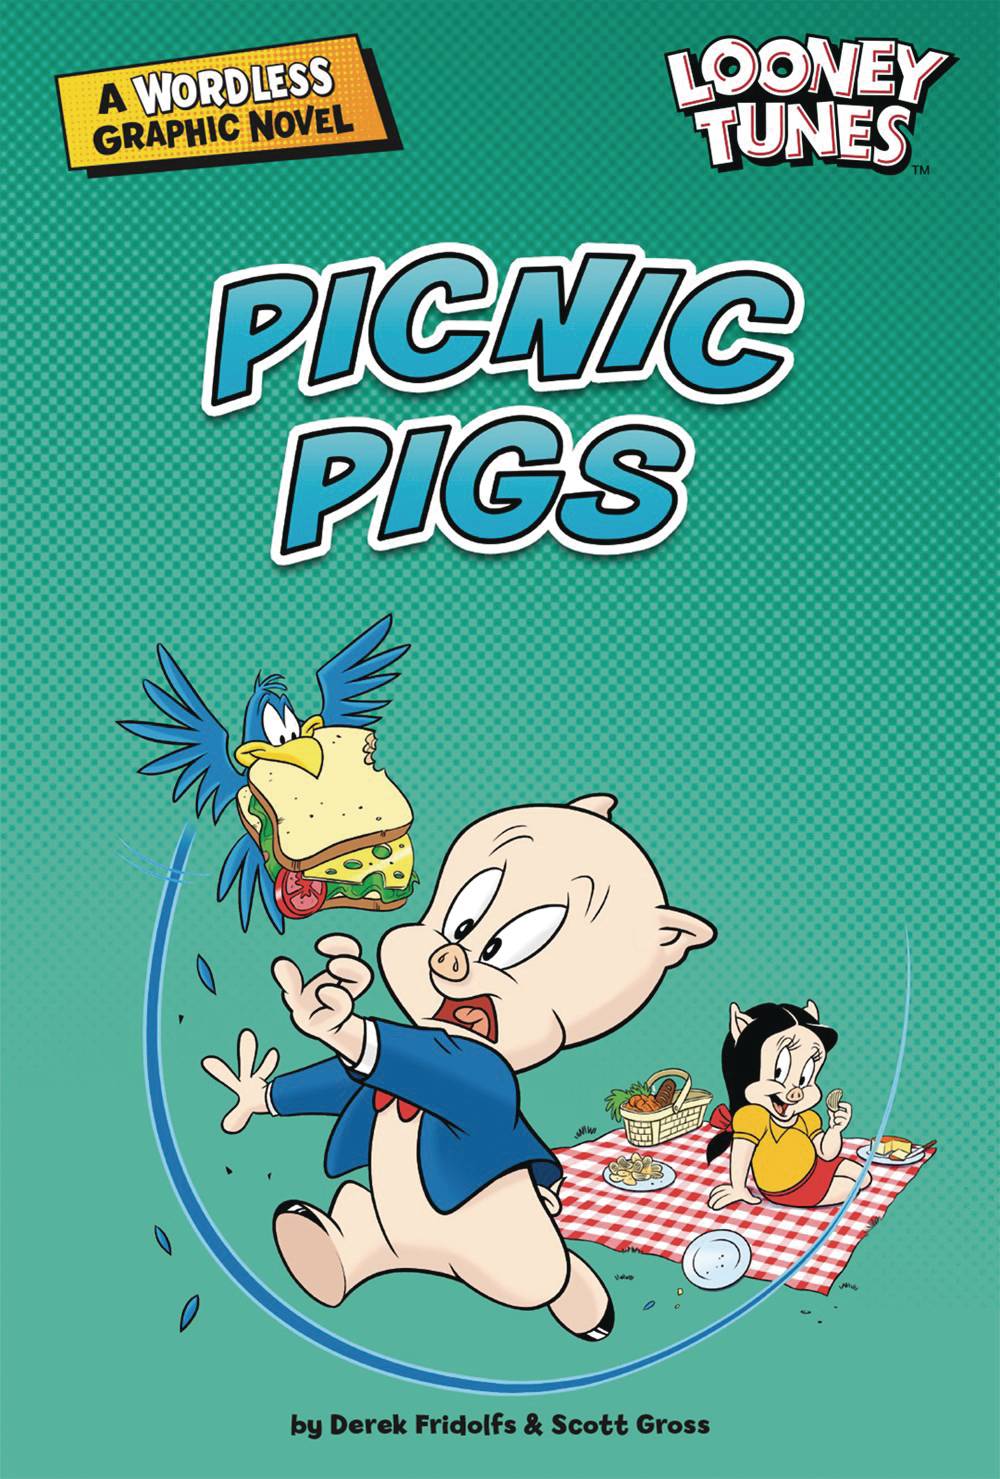 Looney Tunes: Picnic Pigs - A Wordless Graphic Novel